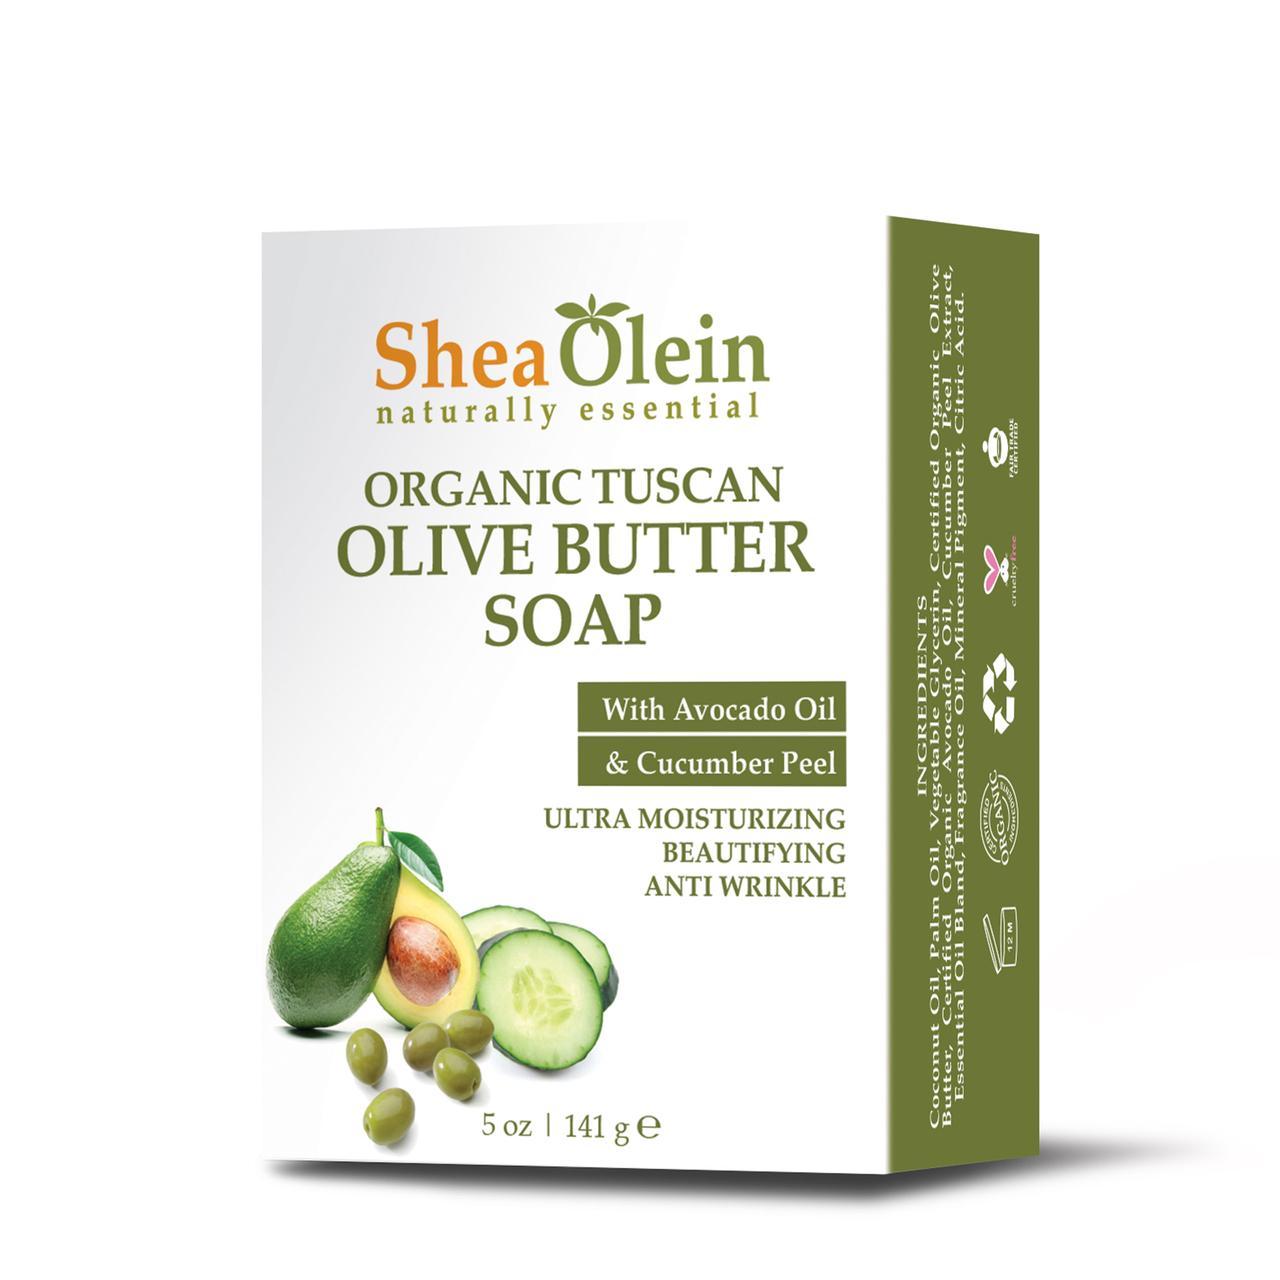 Organic Tuscan Olive Butter Soap with Avocado Oil & Cucumber Peel 5oz